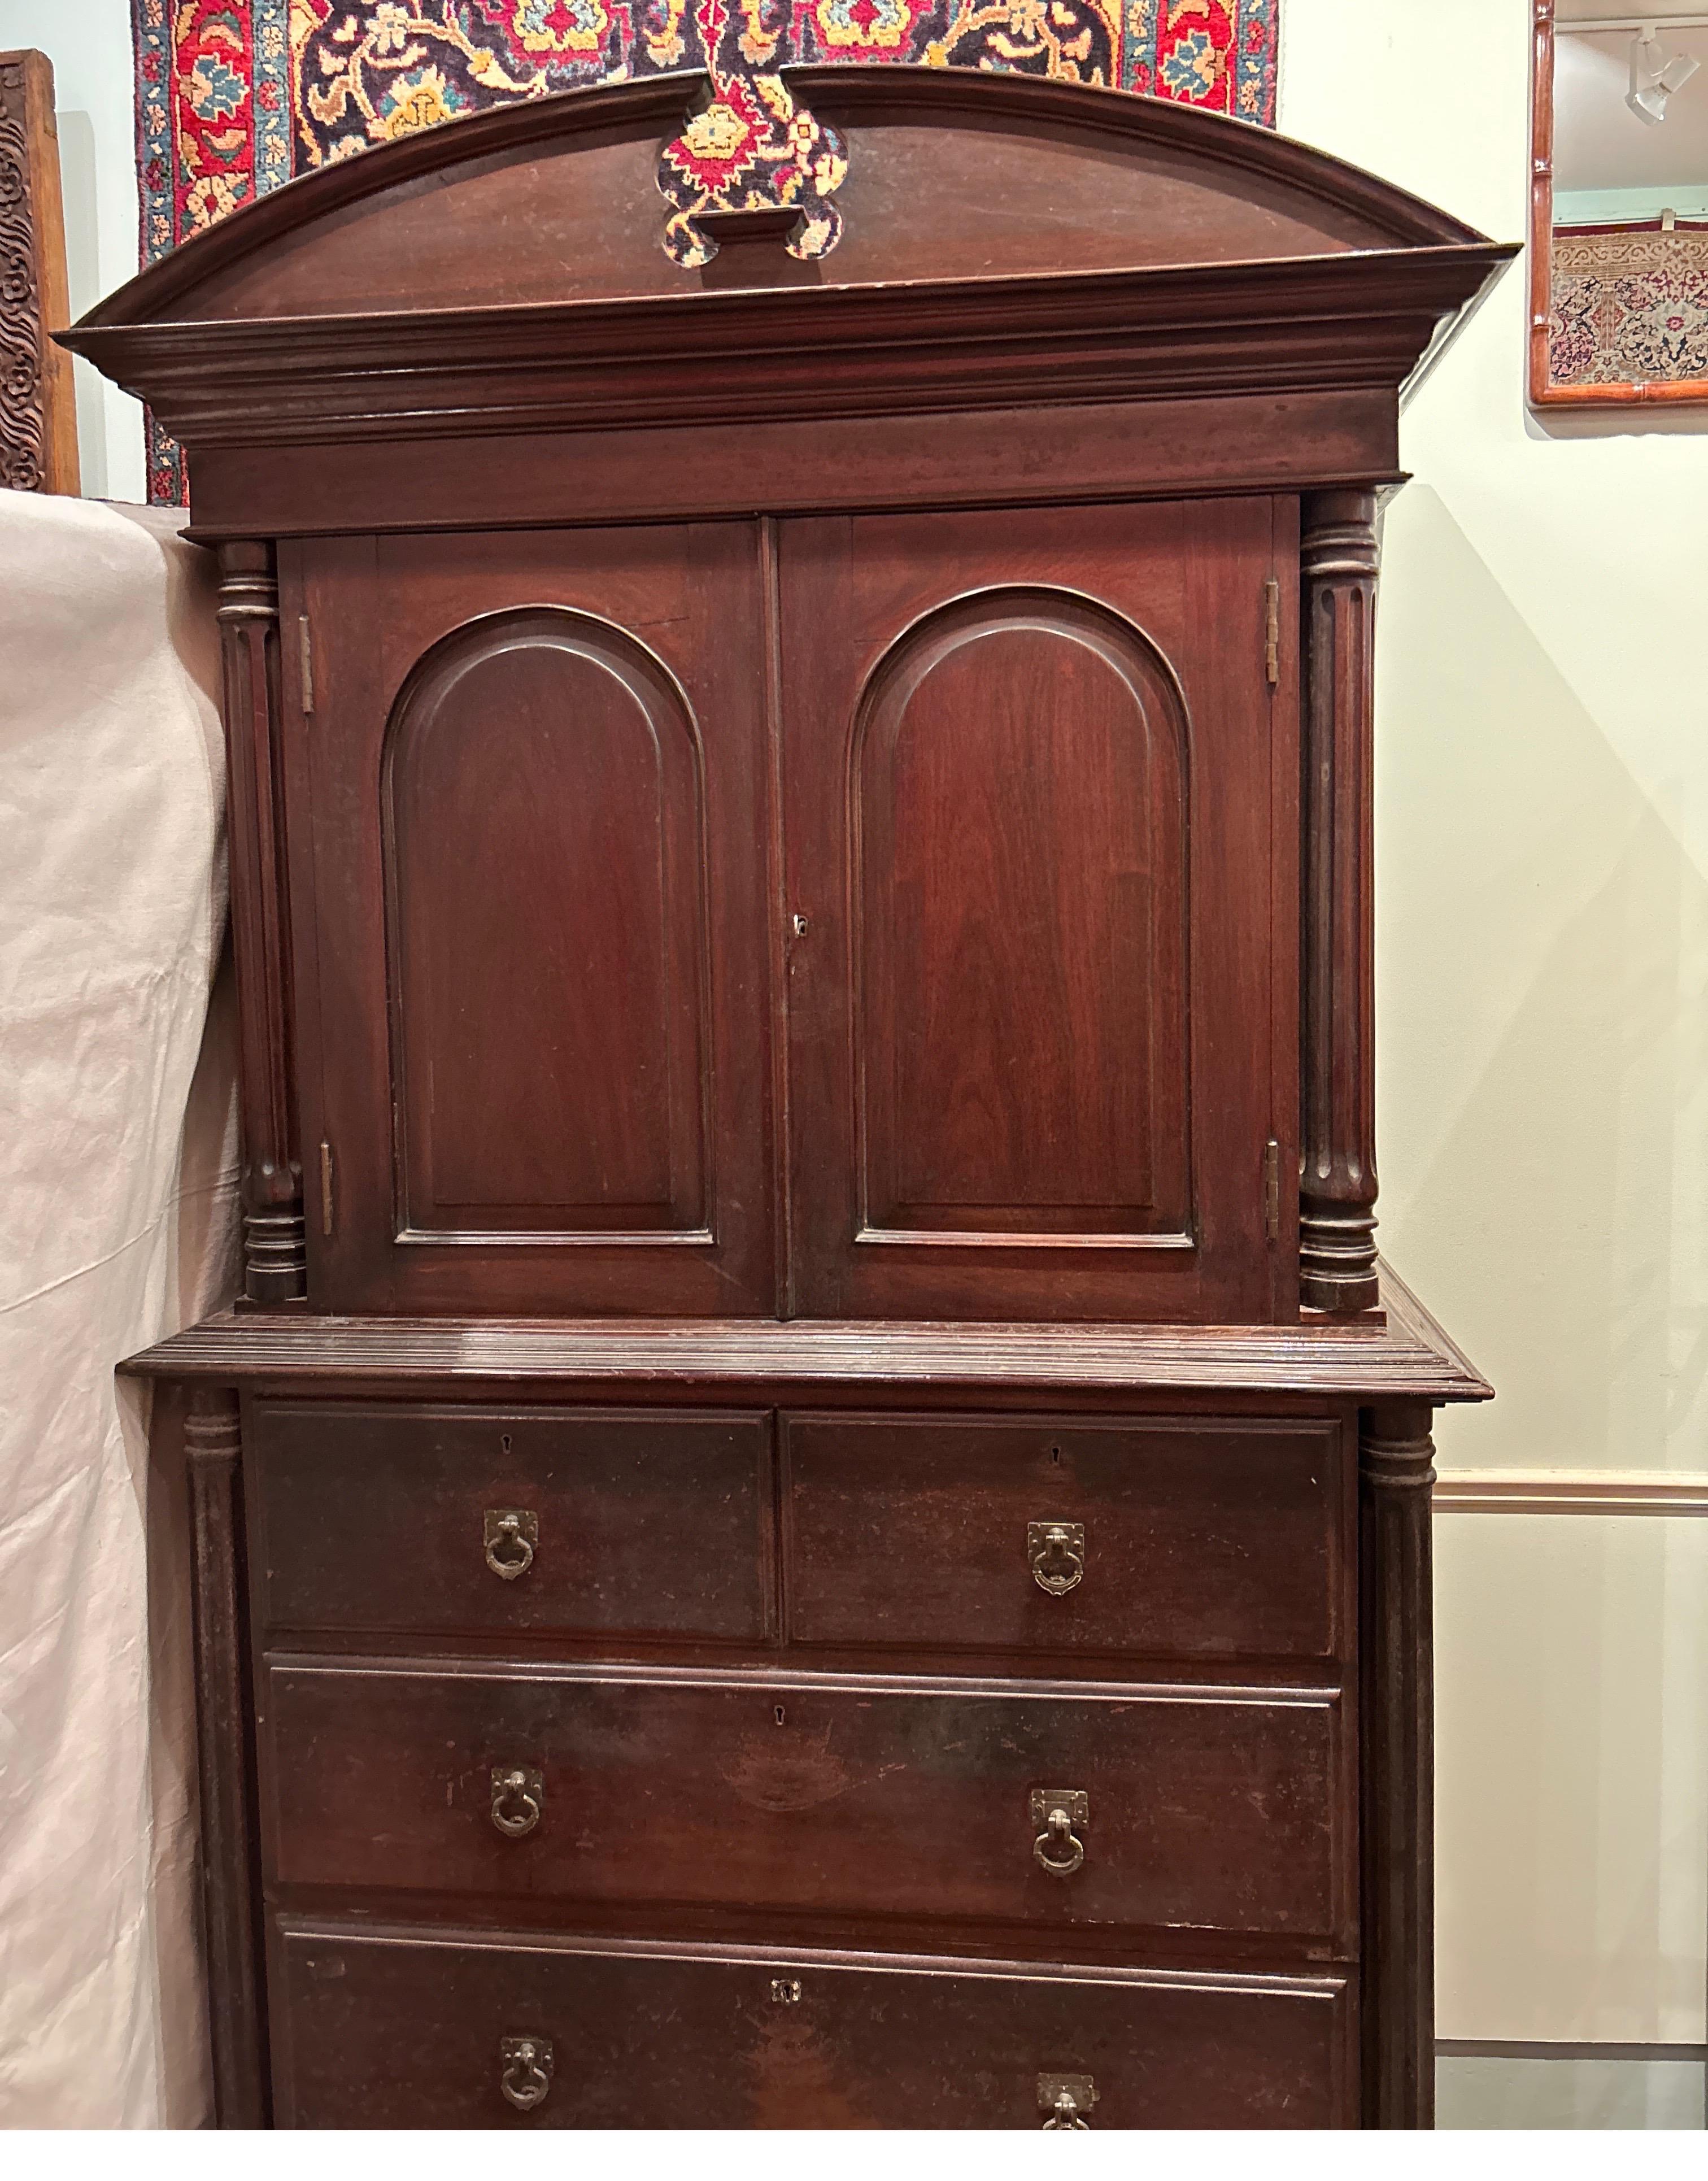 Victorian Colonial Rosewood Large Separating Armoire With Columns & Hardware In Good Condition For Sale In Vancouver, British Columbia